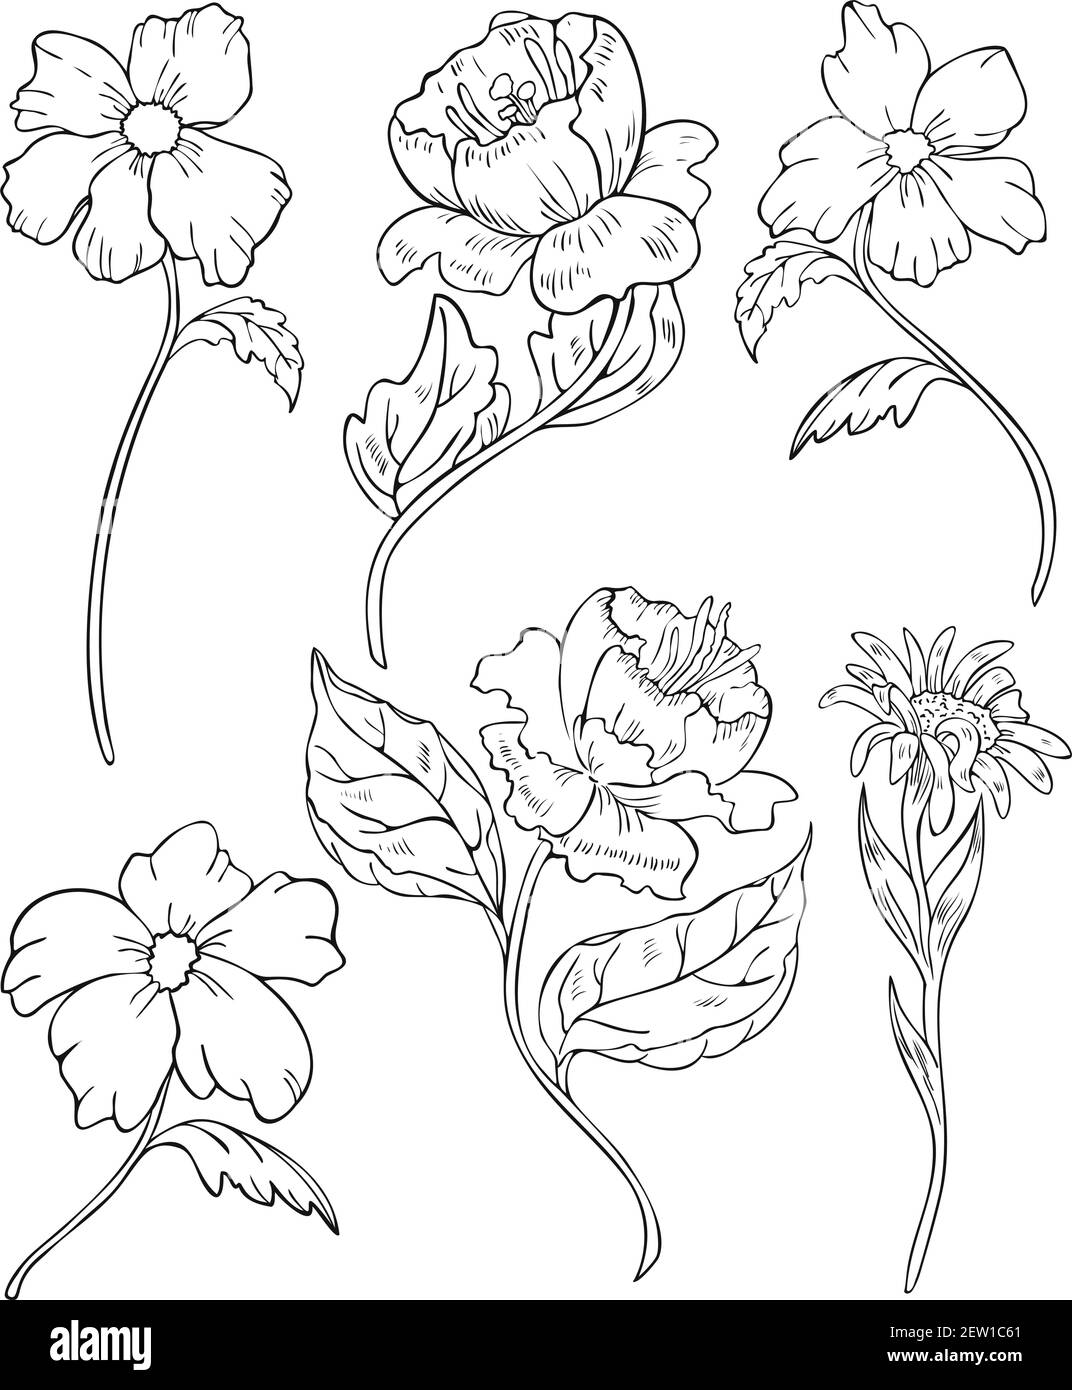 Vector illustration set of black and white blooming flowers. Flowers silhouettes design for coloring book. Stock Vector